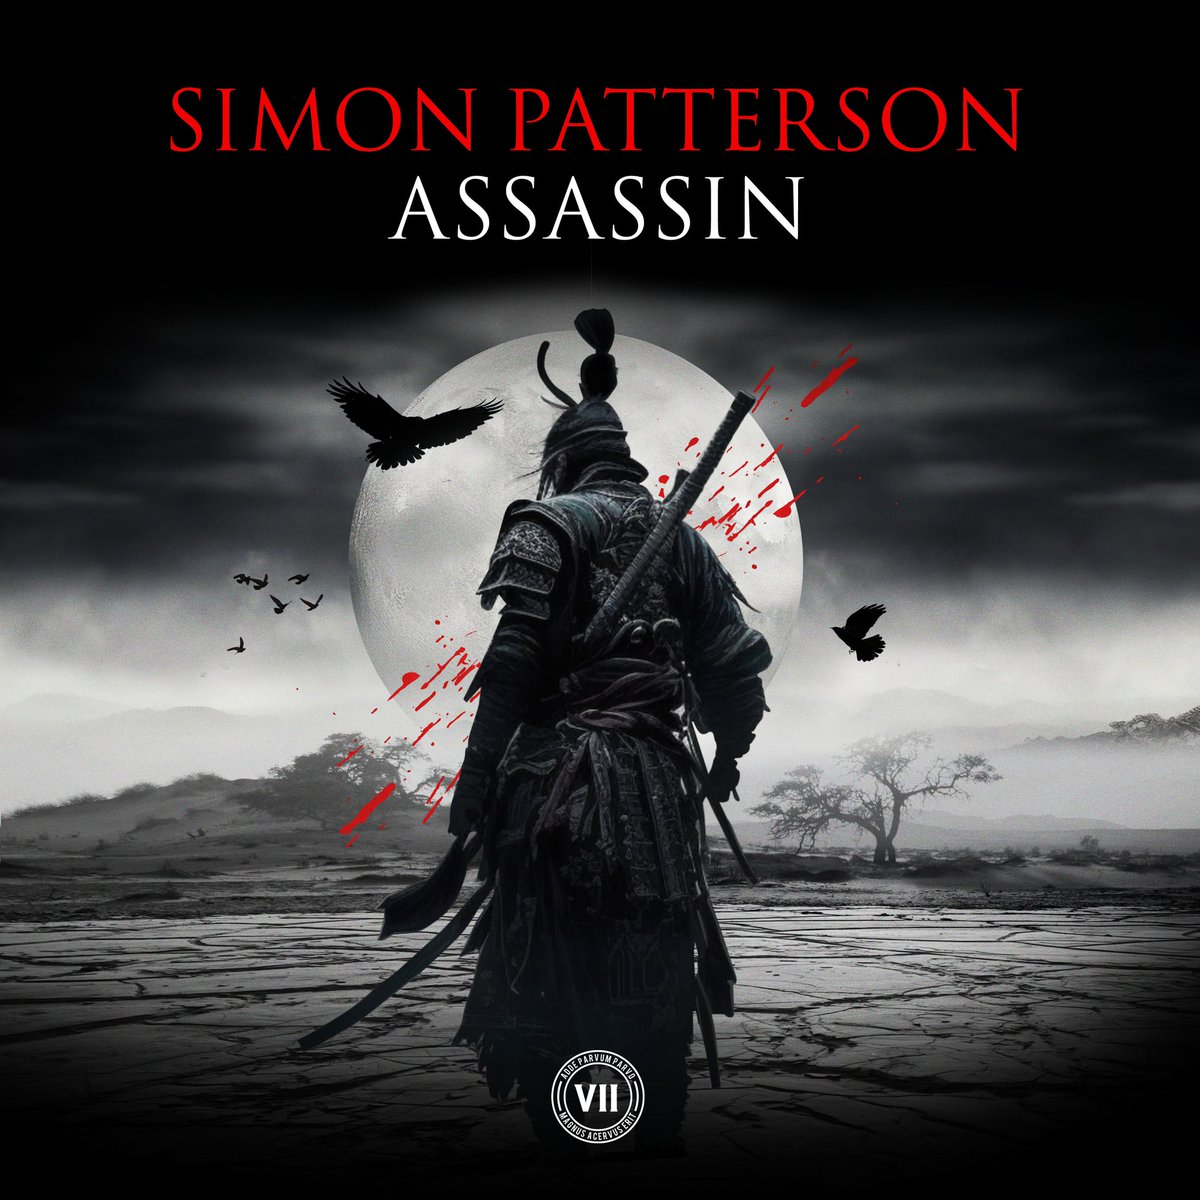 Assassin. Out now on @TheVIICrew >> linktr.ee/simonpatterson